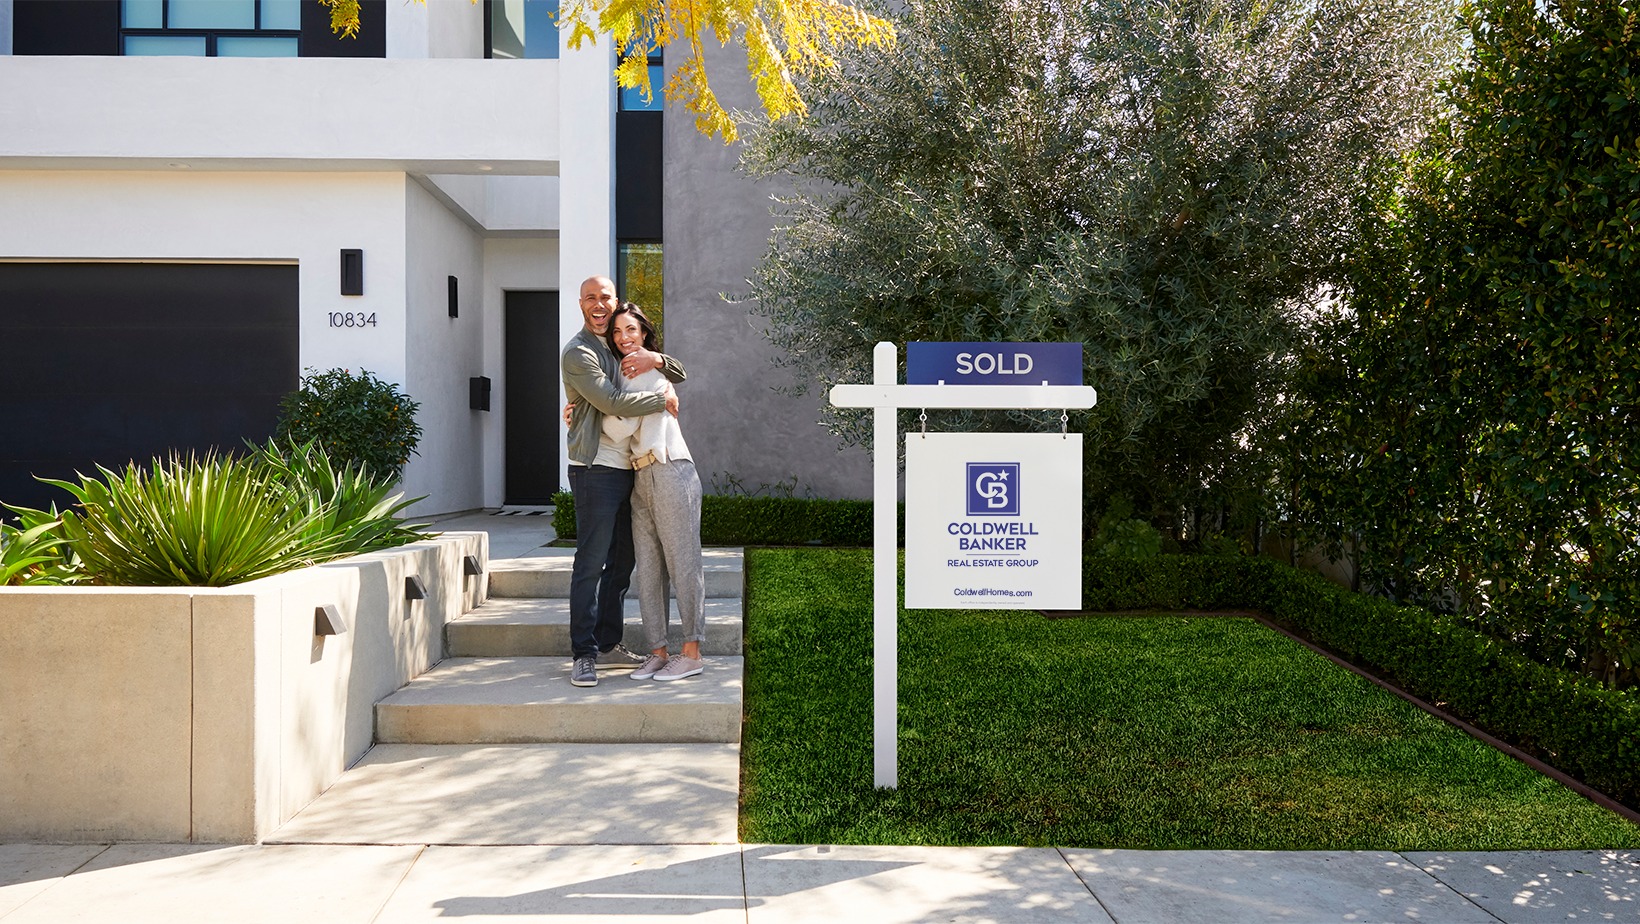 Ultimate Service satisfied clients hugging outside in front of a home with a Coldwell Banker 'sold' signage on the lawn